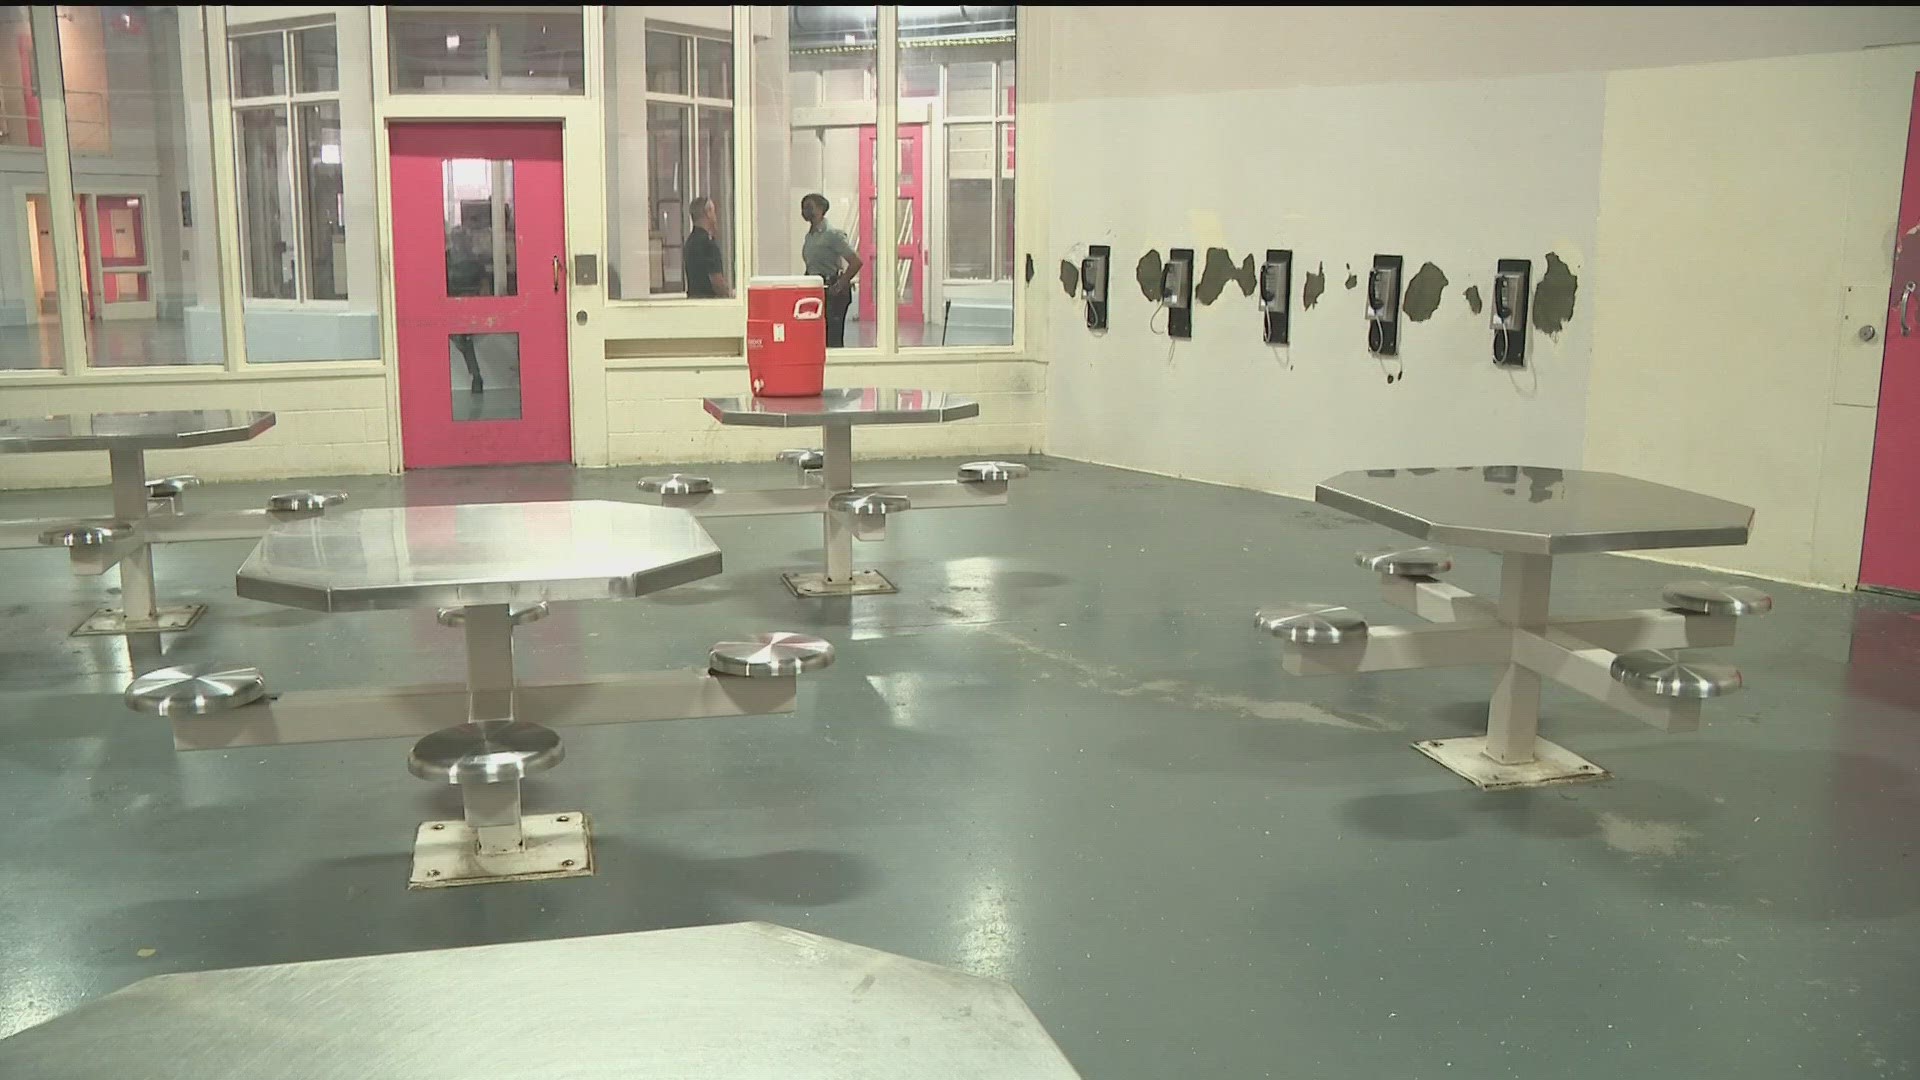 For the first time since 2005, we're getting an exclusive look inside the Clayton County Jail.